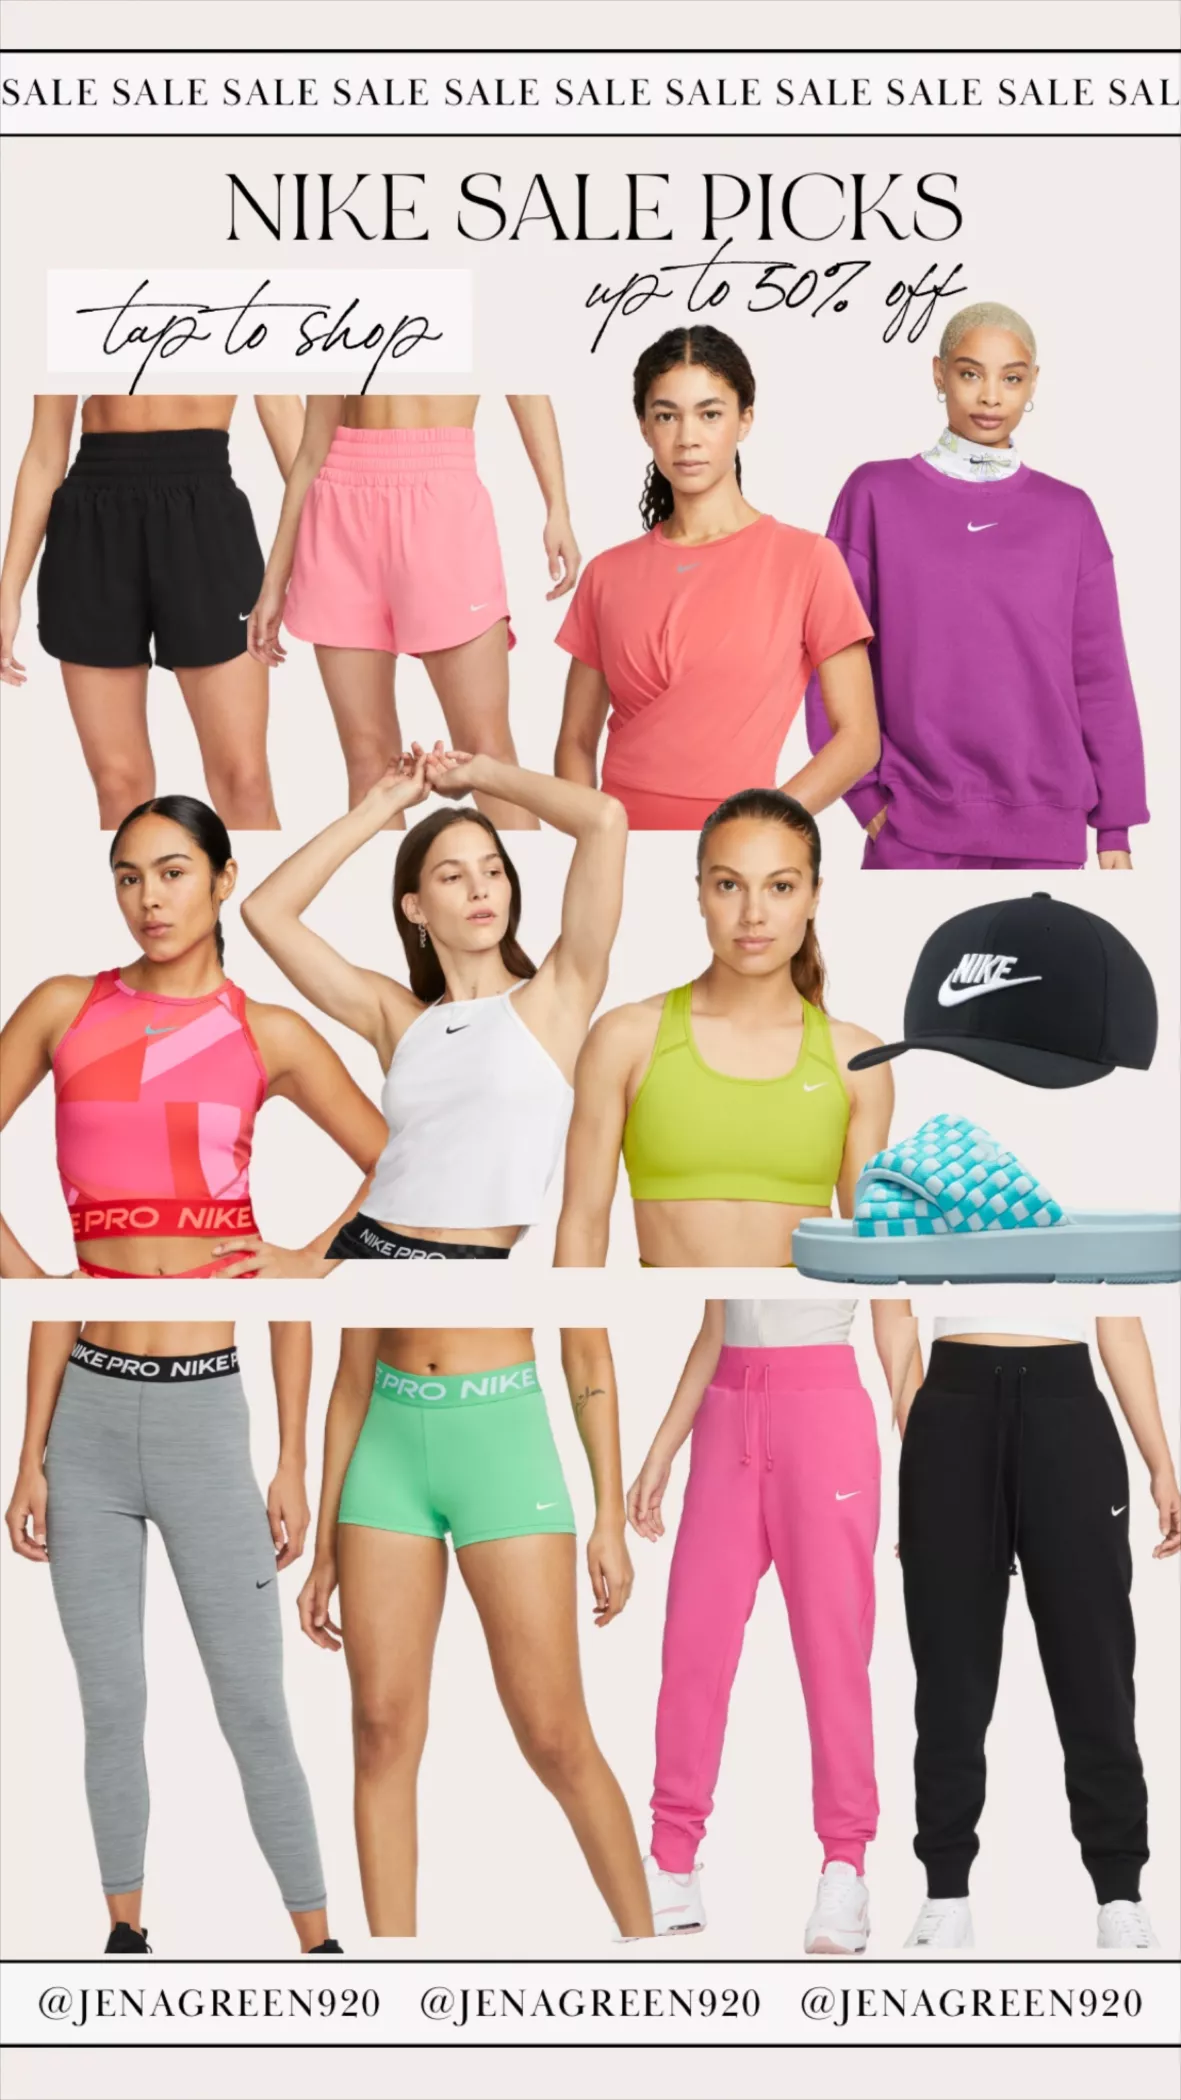 fit inspo  Nike pros, Nike pro outfit, Cute nike outfits